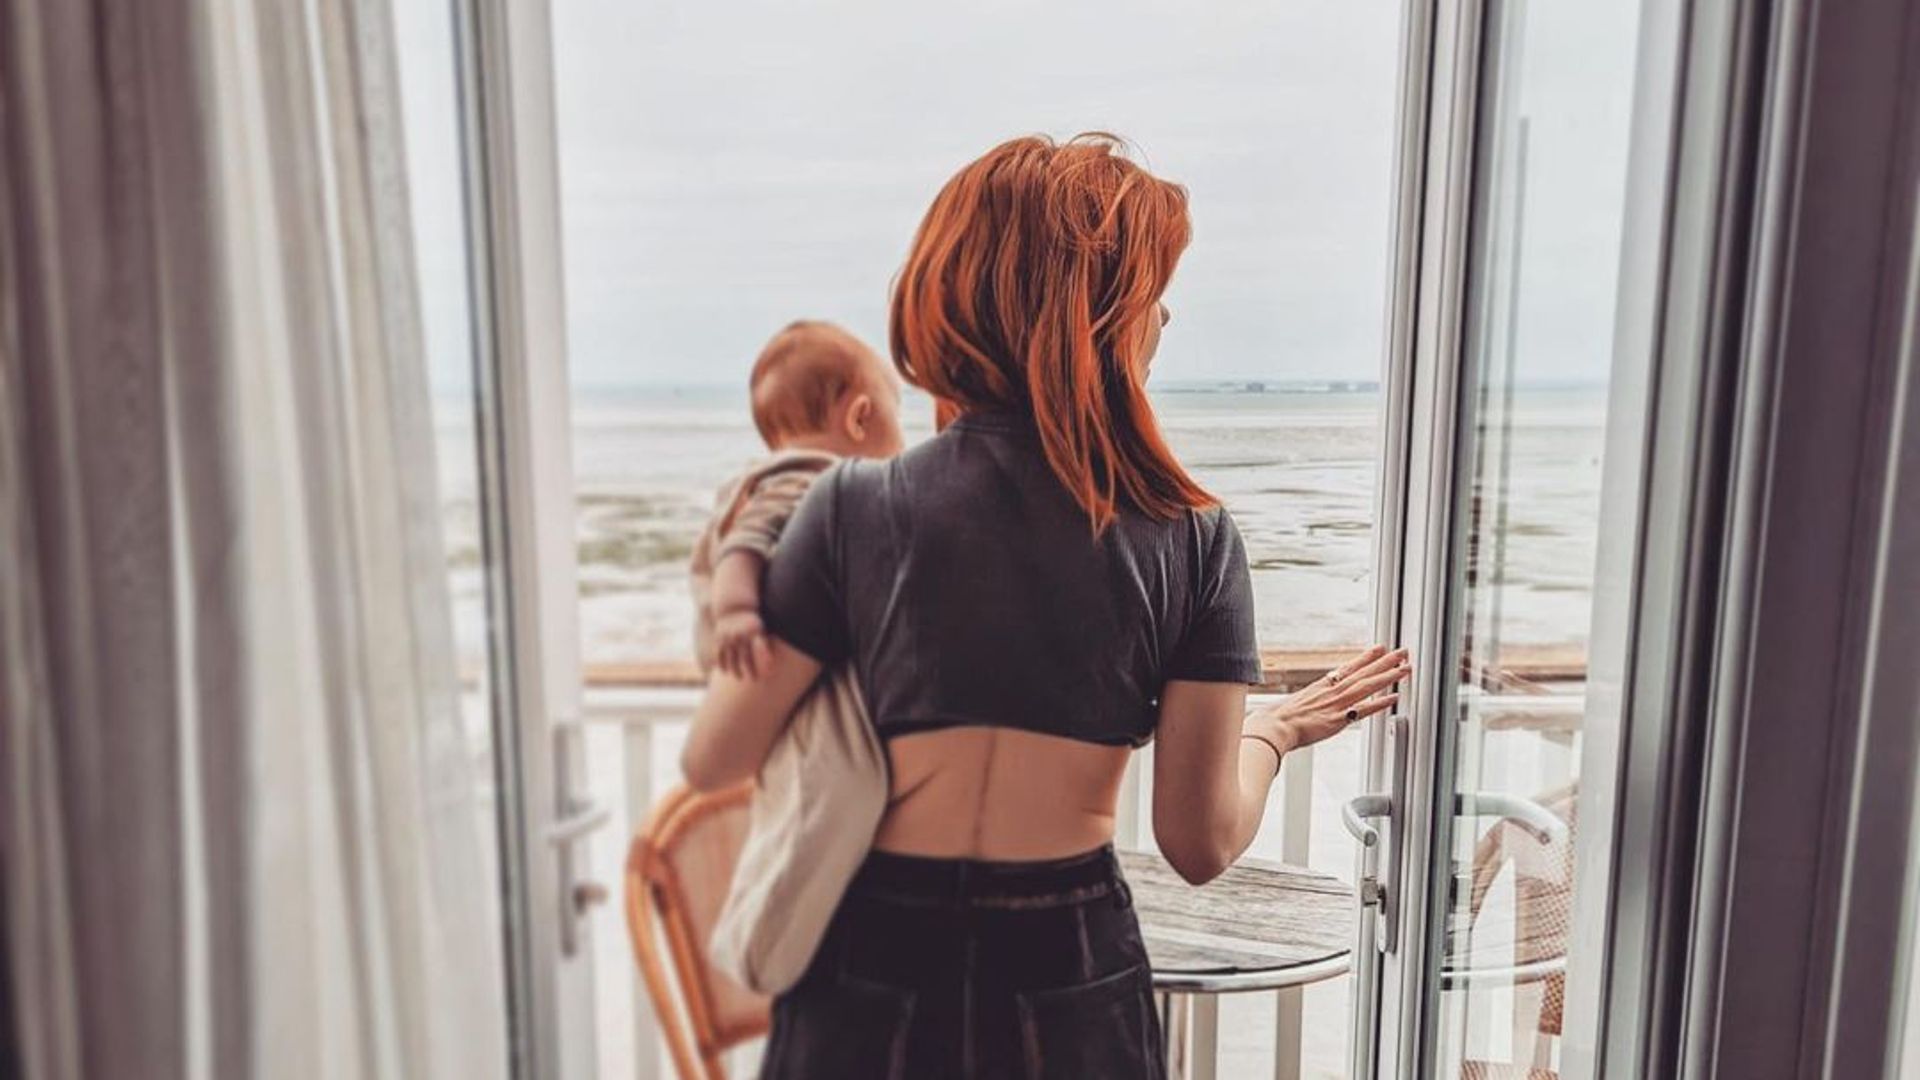 stacey dooley holding daughter minnie on terrace overlooking sea